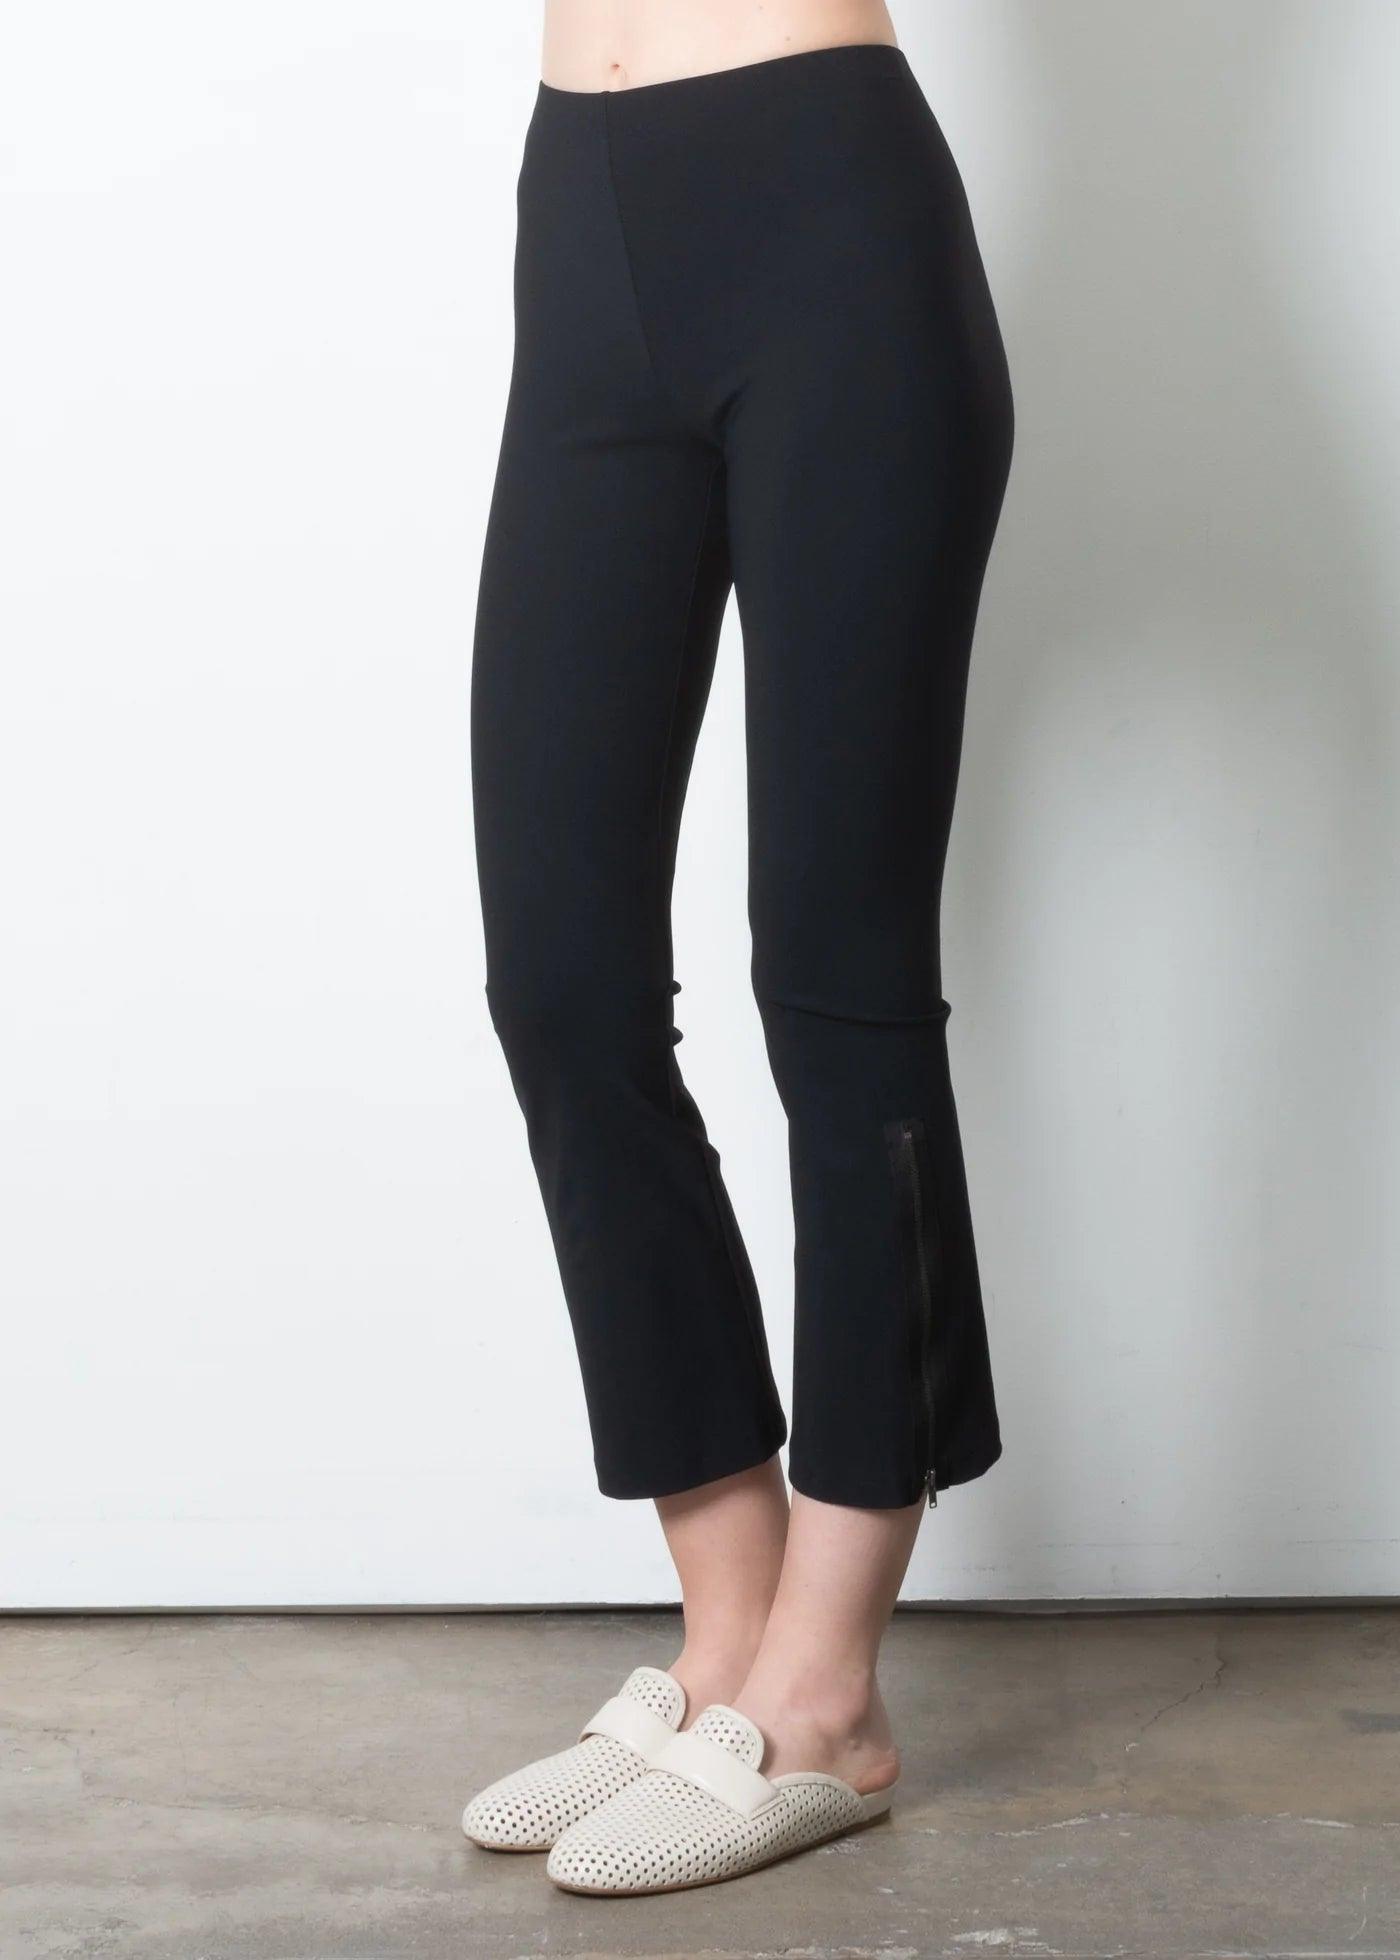 Tech Stretch Cropped Side Zip Leggings by Elaine Kim (Various Colors) - Haven